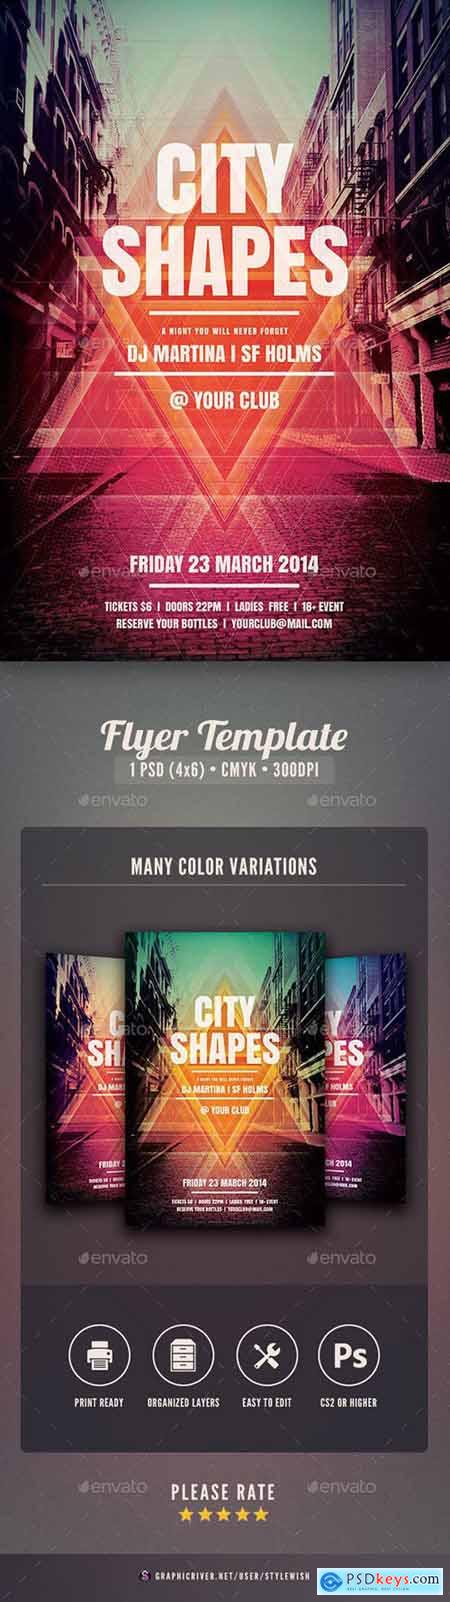 Graphicriver City Shapes Flyer